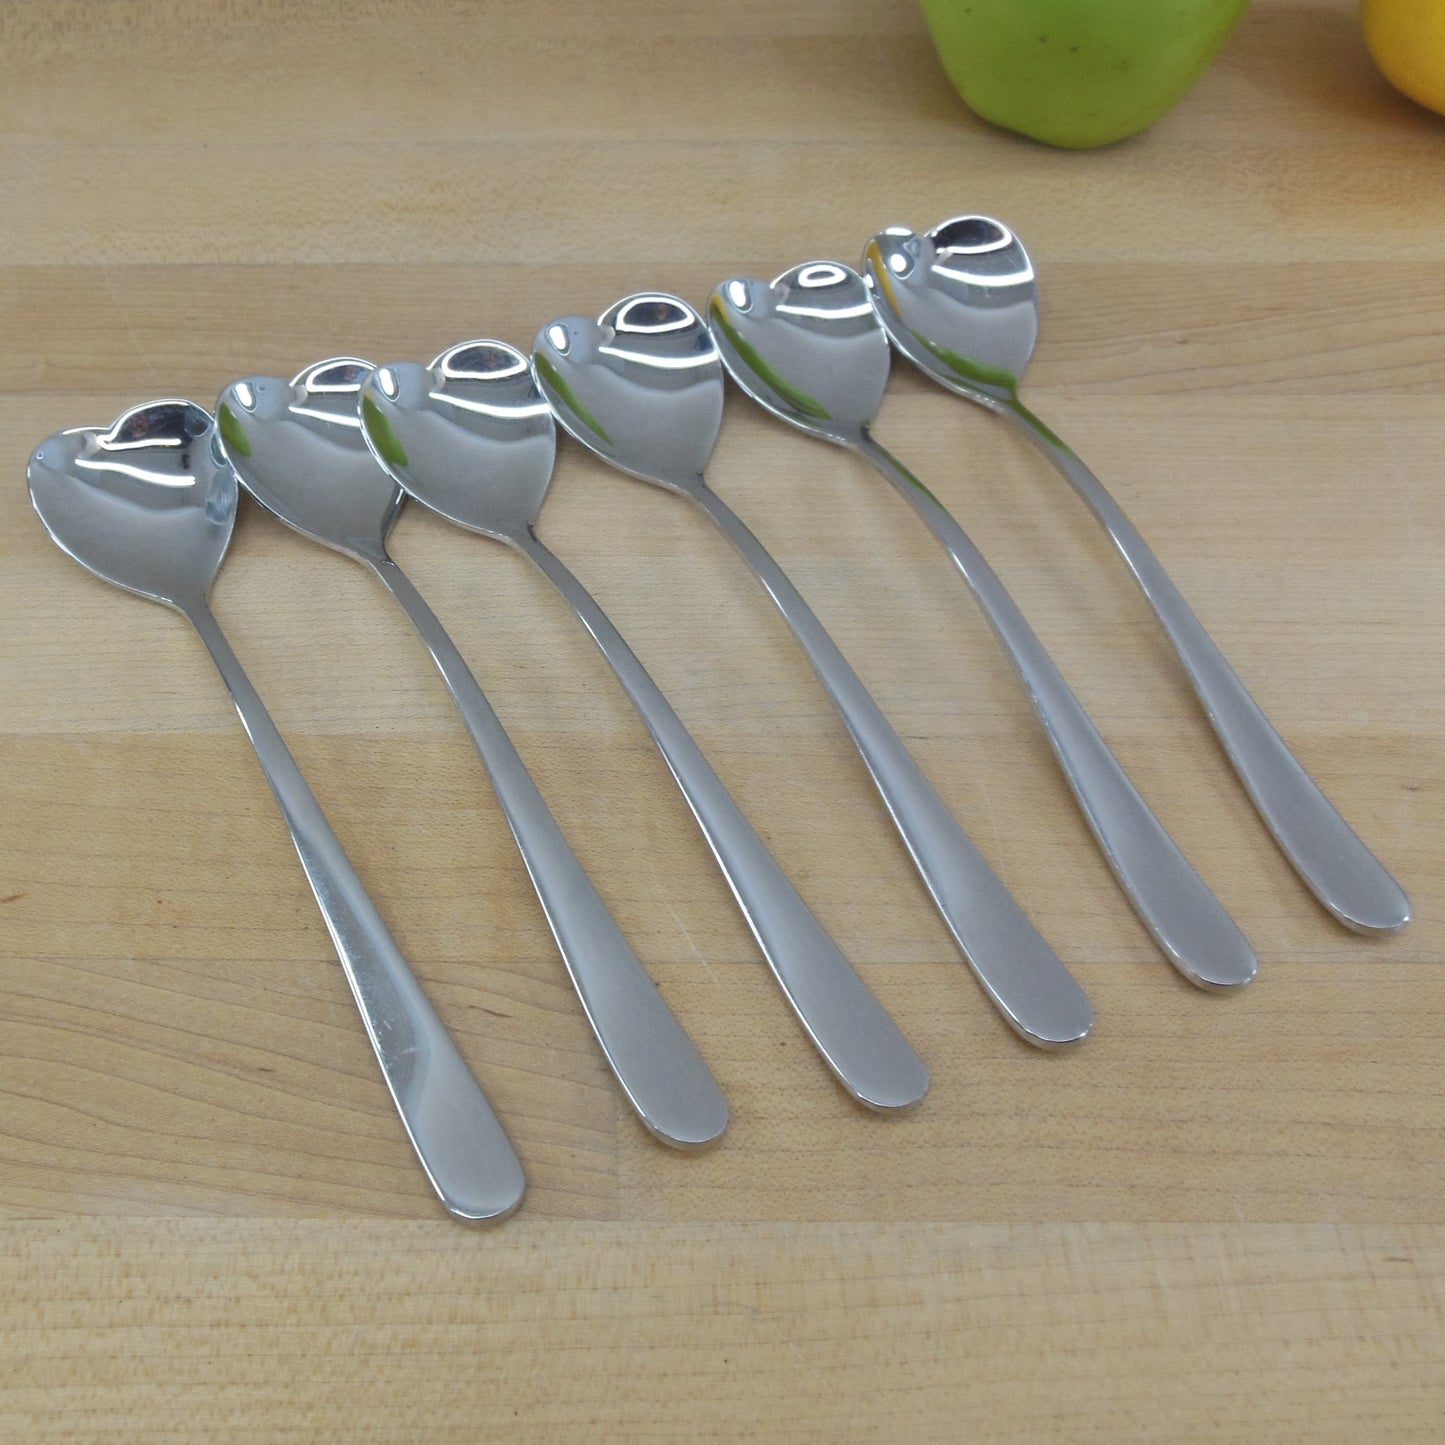 Alessi Italy Stainless Big Love Ice Cream Spoons 6.75" Heart Shaped - 6 Set